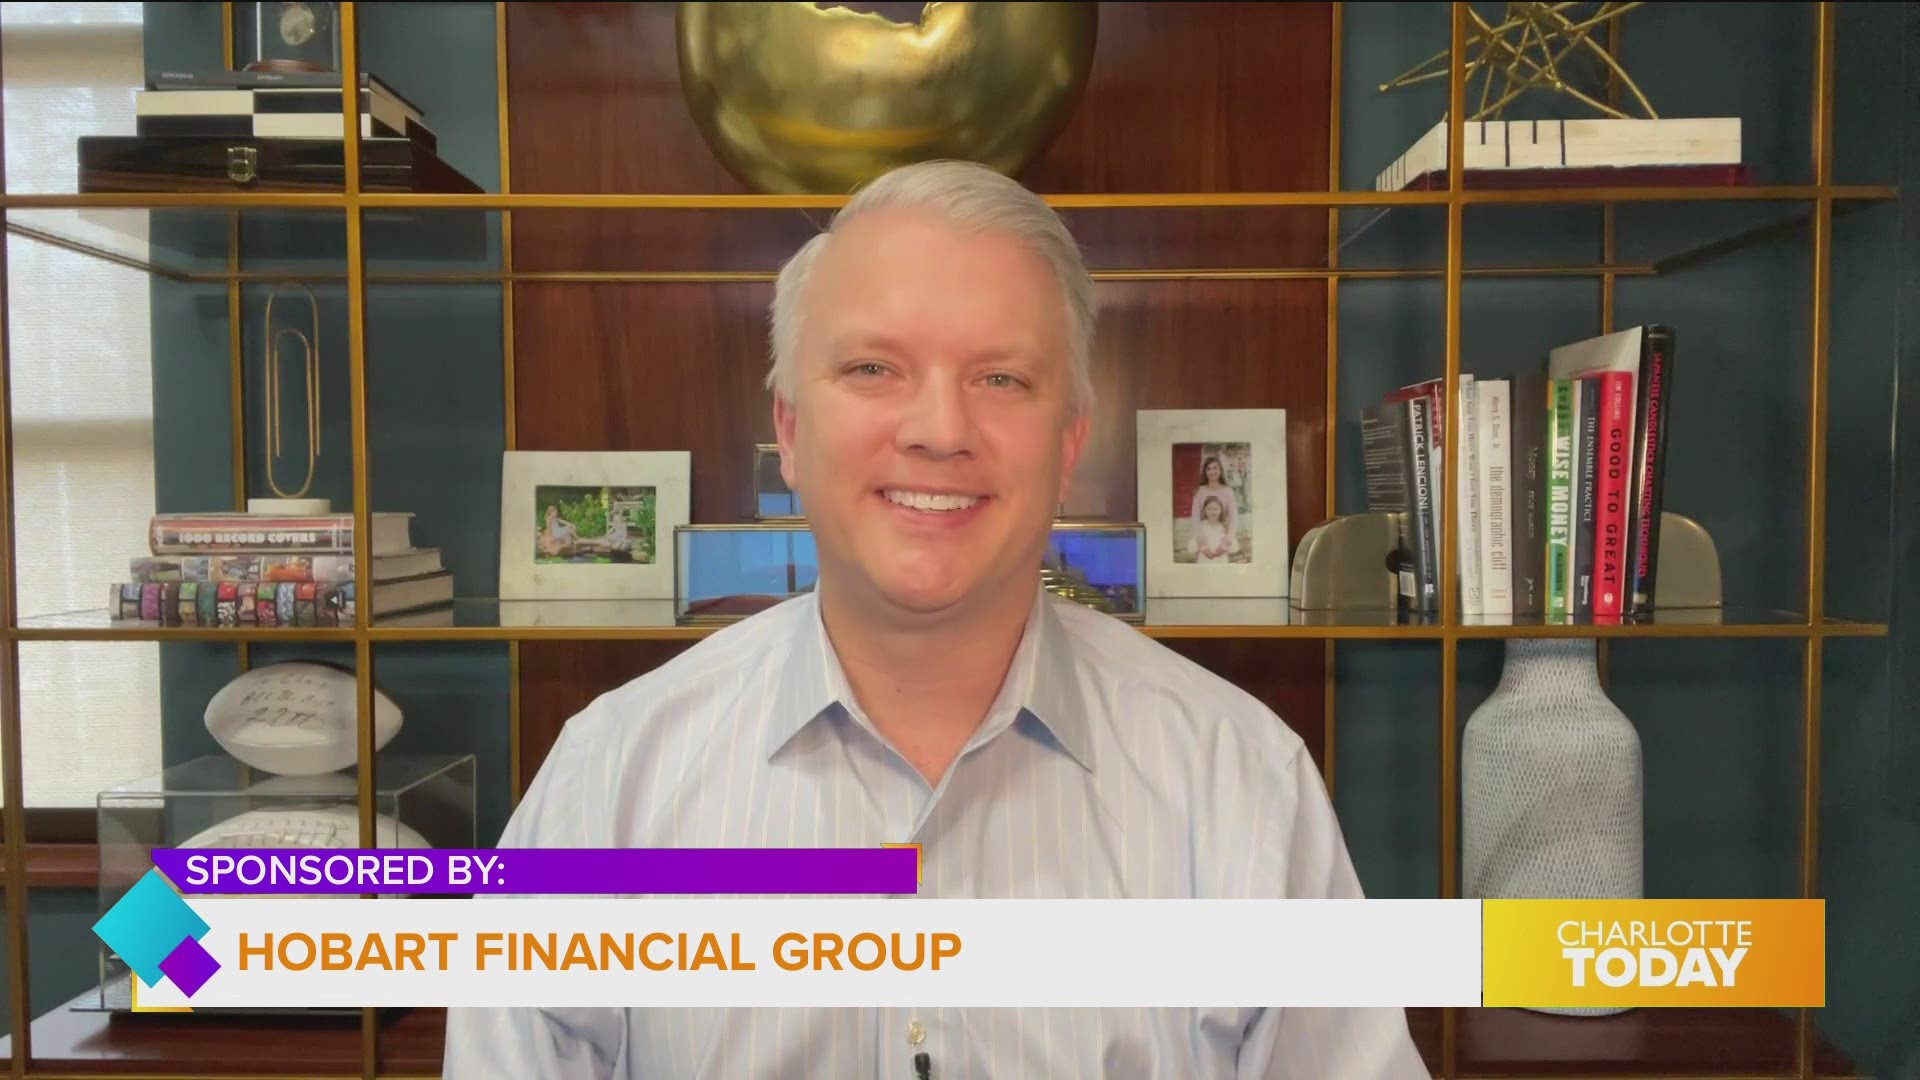 Hobart Financial Group helps you plan for the unexpected